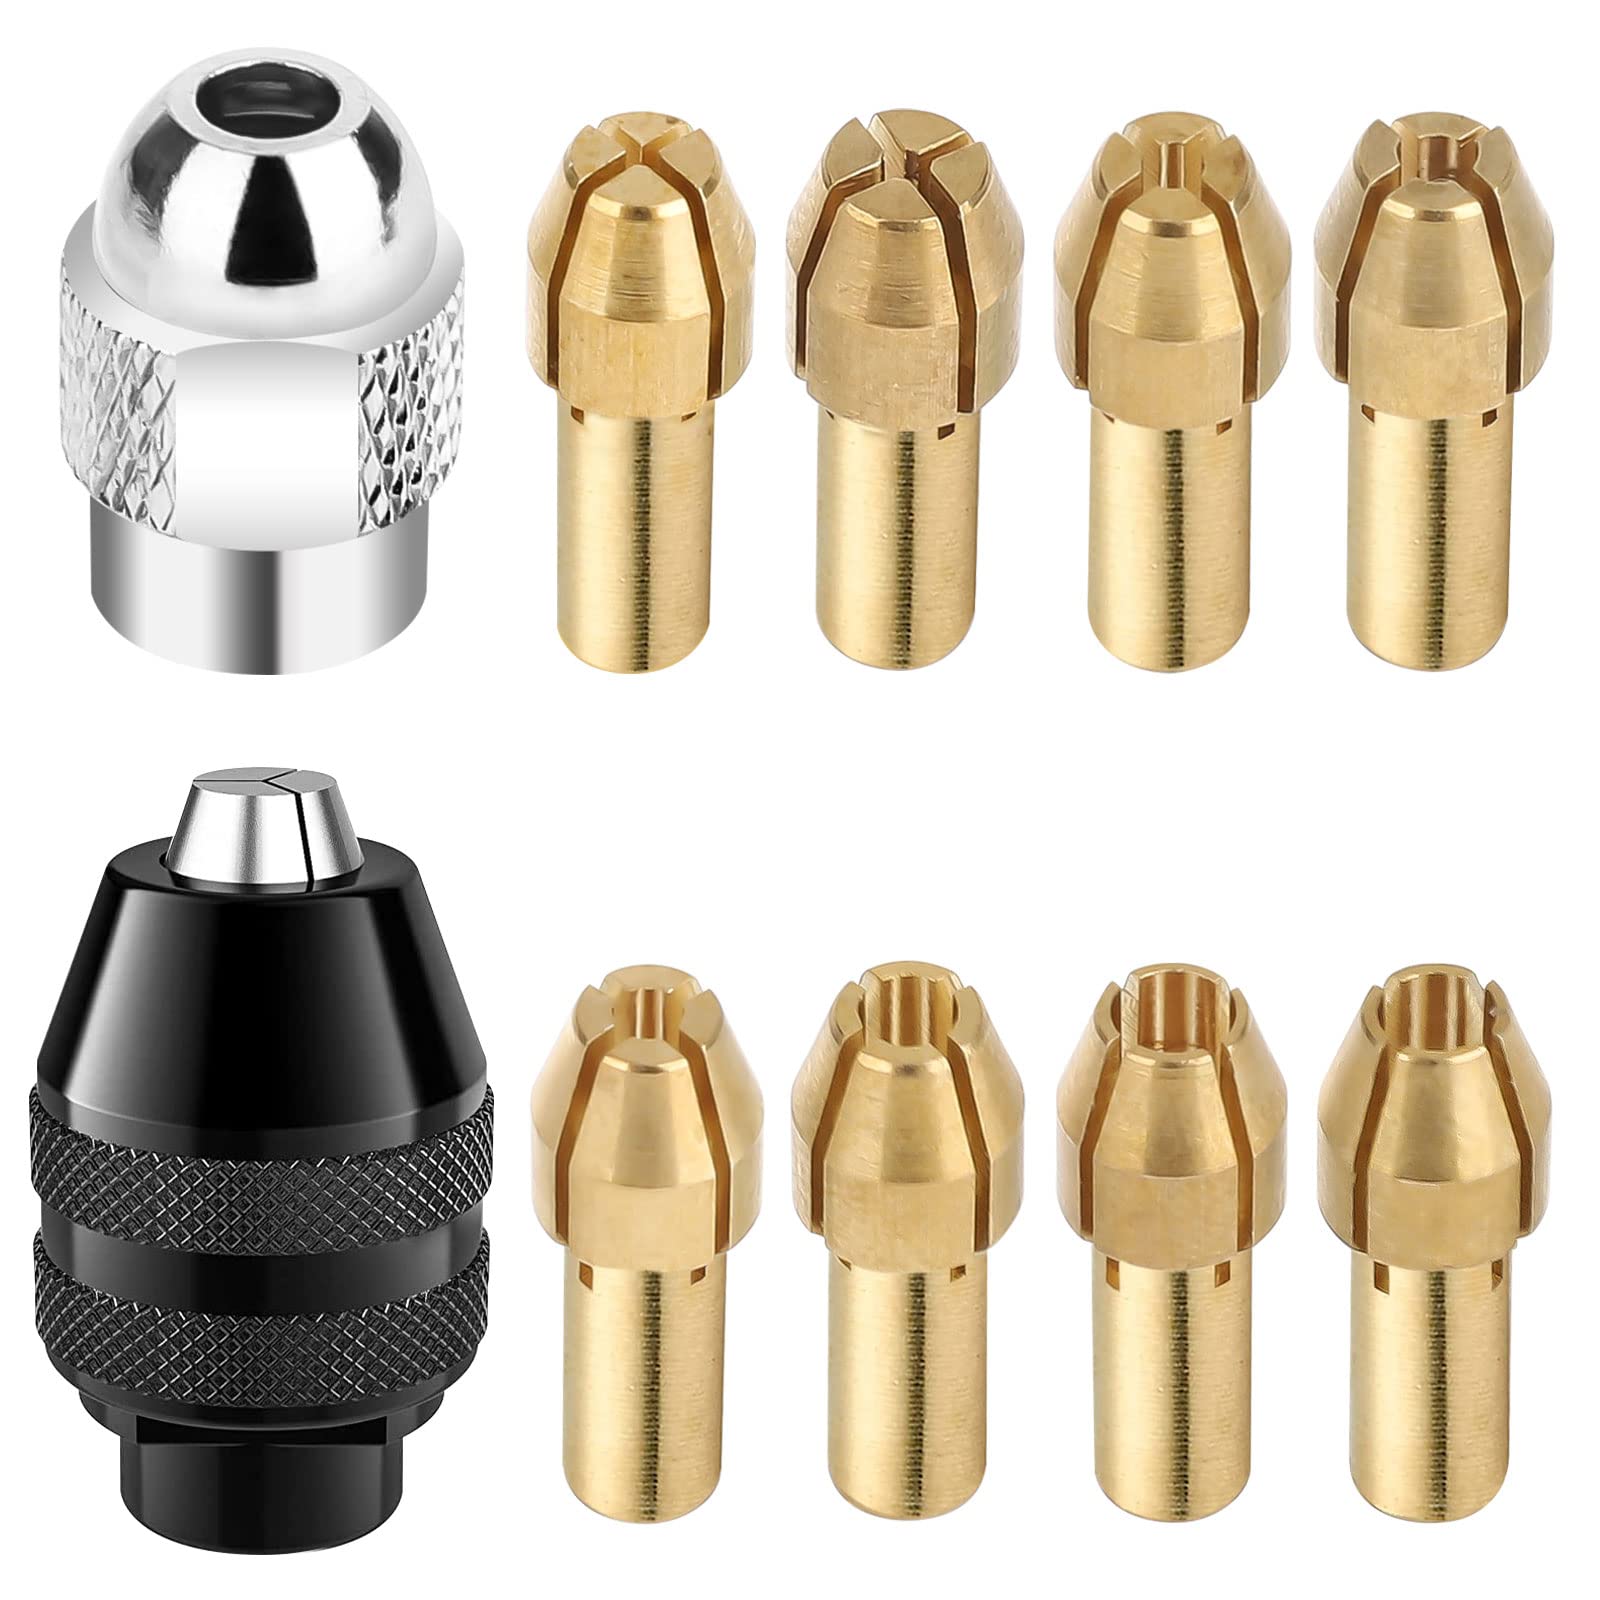 8pcs Brass Collet Set with Keyless Drill Chuck Replacement 4485 Brass Quick Change Rotary Drill Nut Tool Set with 132 to 1